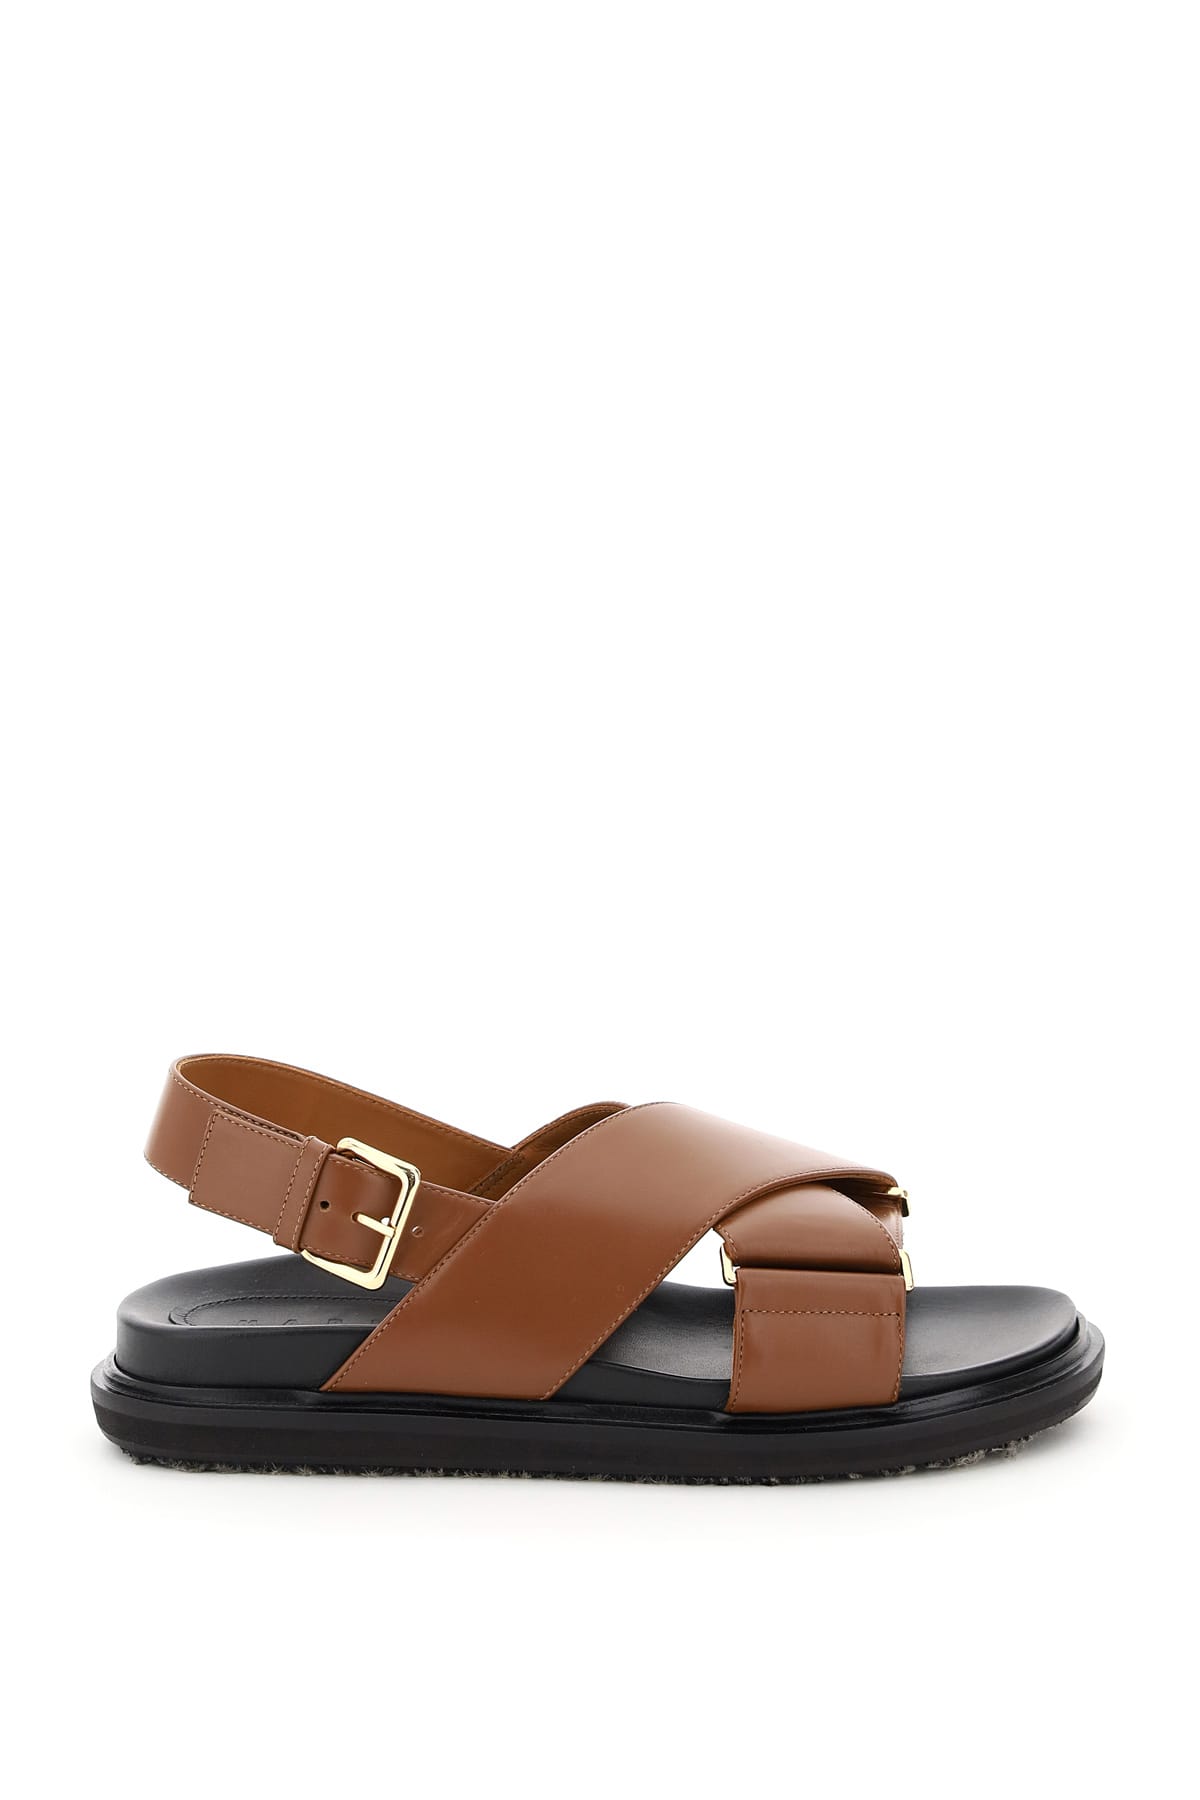 Buy Marni Fussbett Calfskin Sandals online, shop Marni shoes with free shipping